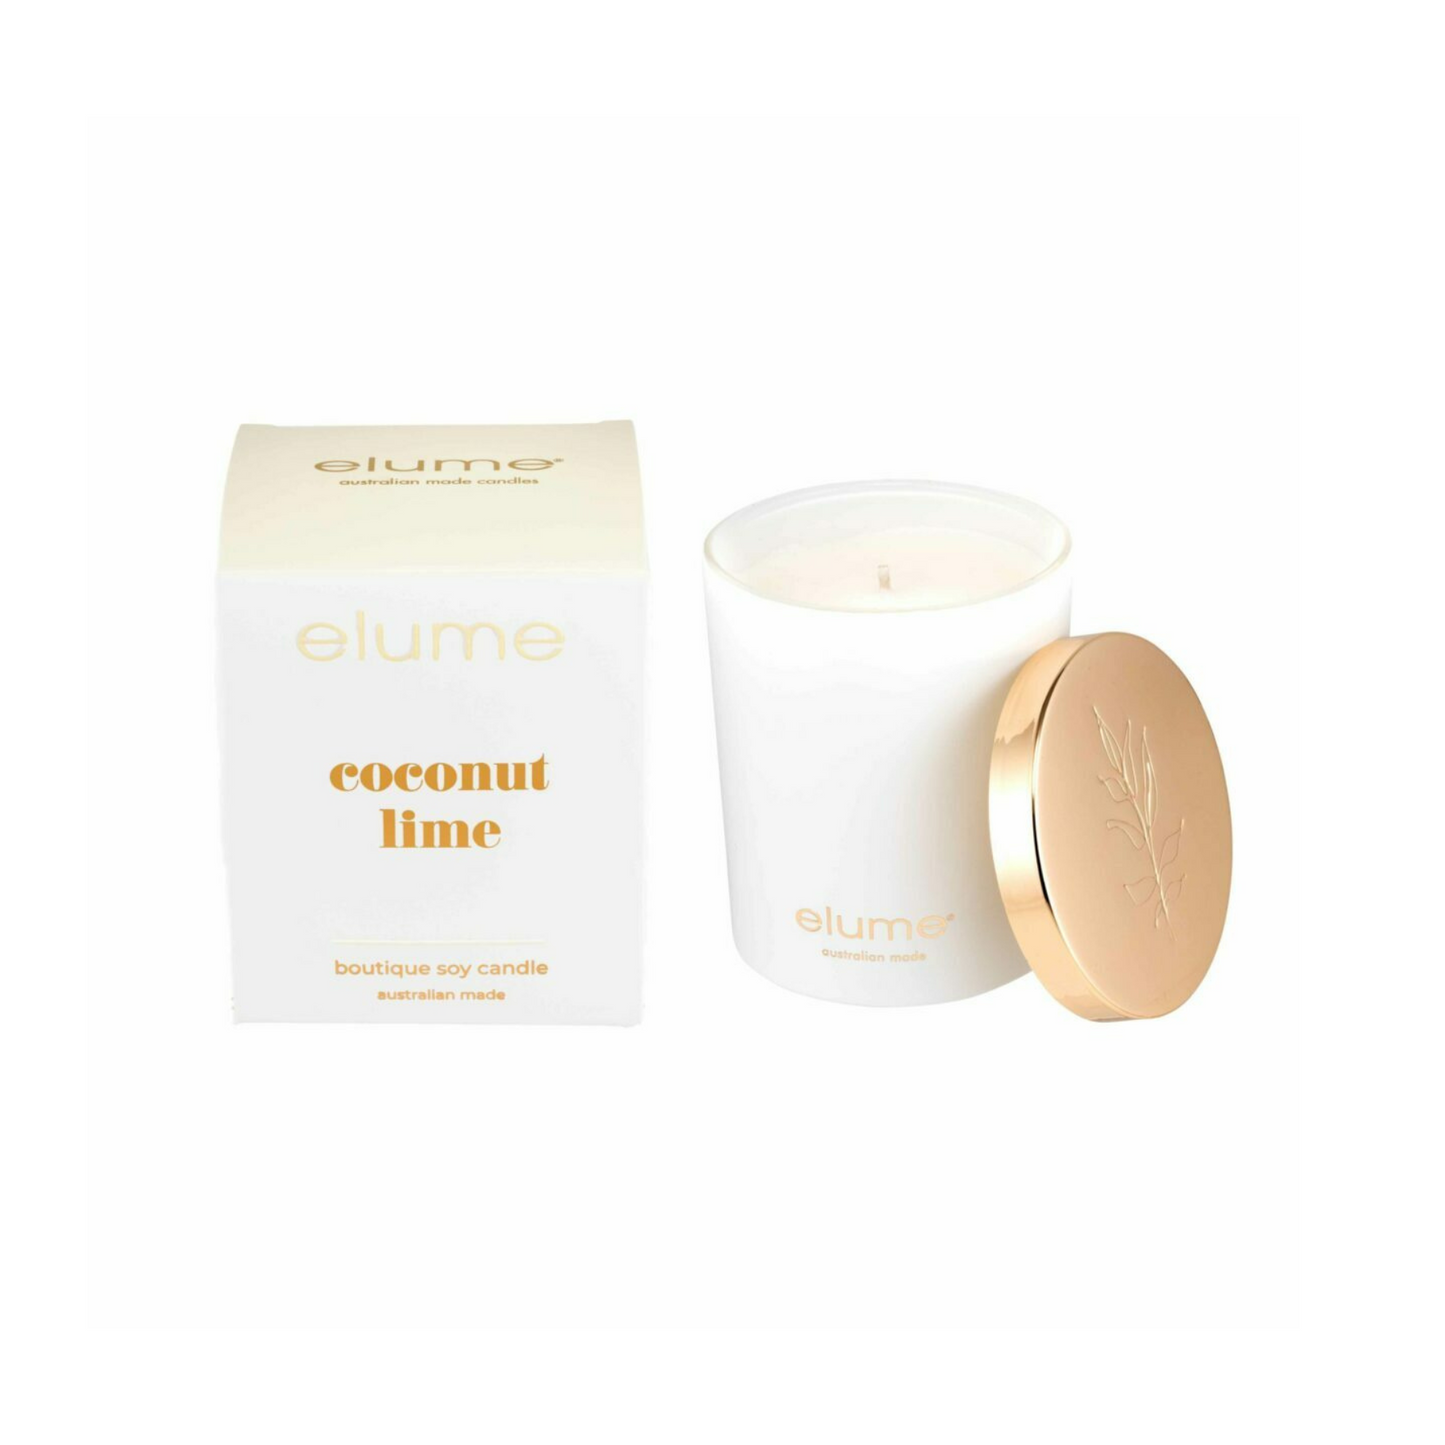 Coconut Lime: Elume Boutique Soy Candle